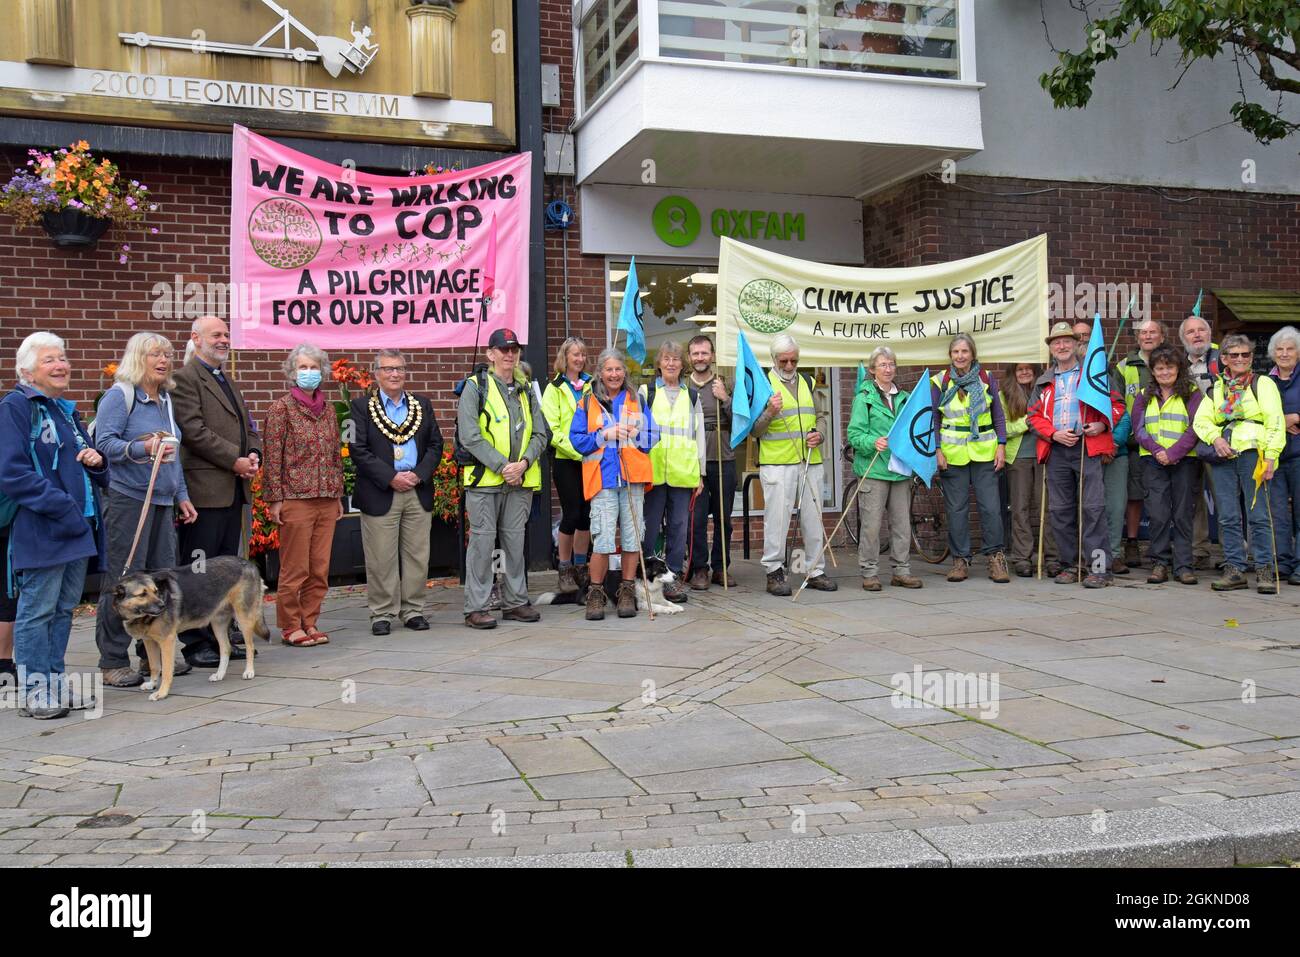 Leominster, Herefordshire, UK. 15th September 2021. Marchers assemble in Leominster town centre at the start of their 'Camino to Cop' pilgrimage to the COP26  Climate Change Conference in Glasgow. The group will join hundreds of other Walkers from all over the UK on the 'Pilgrimage For The Planet' which arrives in  Glasgow on October 30th.  G.P. Essex/Alamy Live News Stock Photo